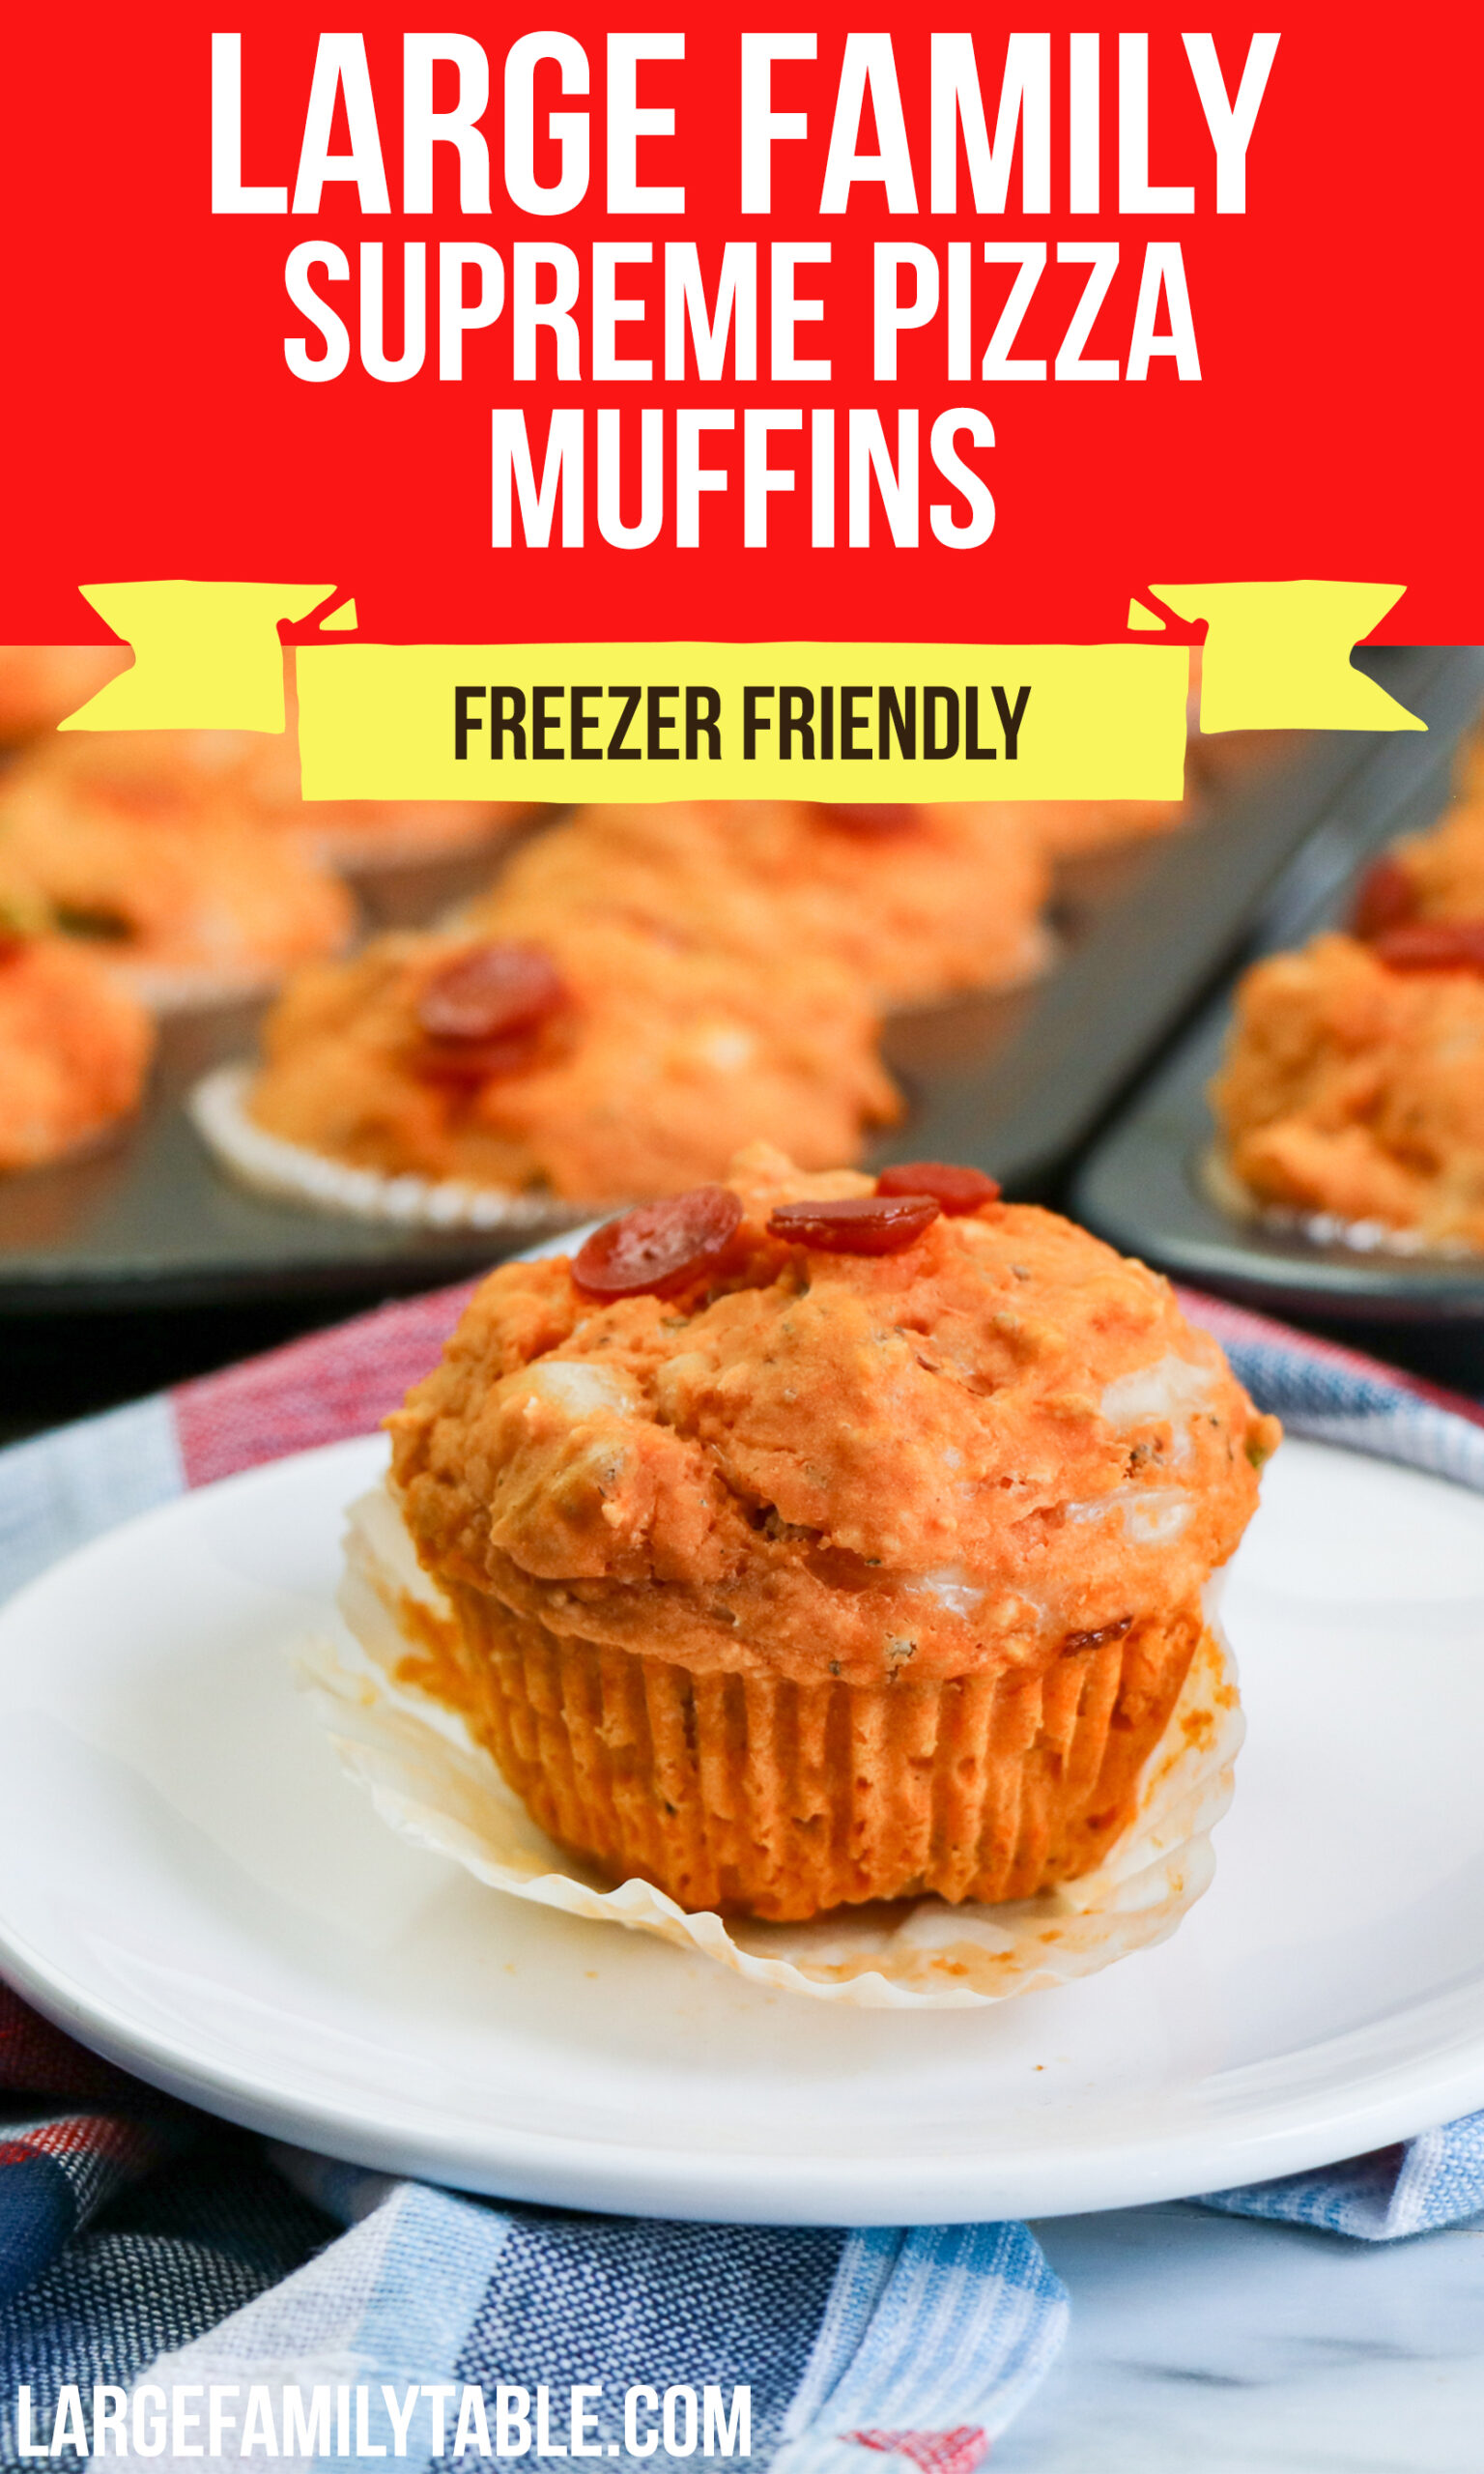 Large Family Supreme Pizza Muffins